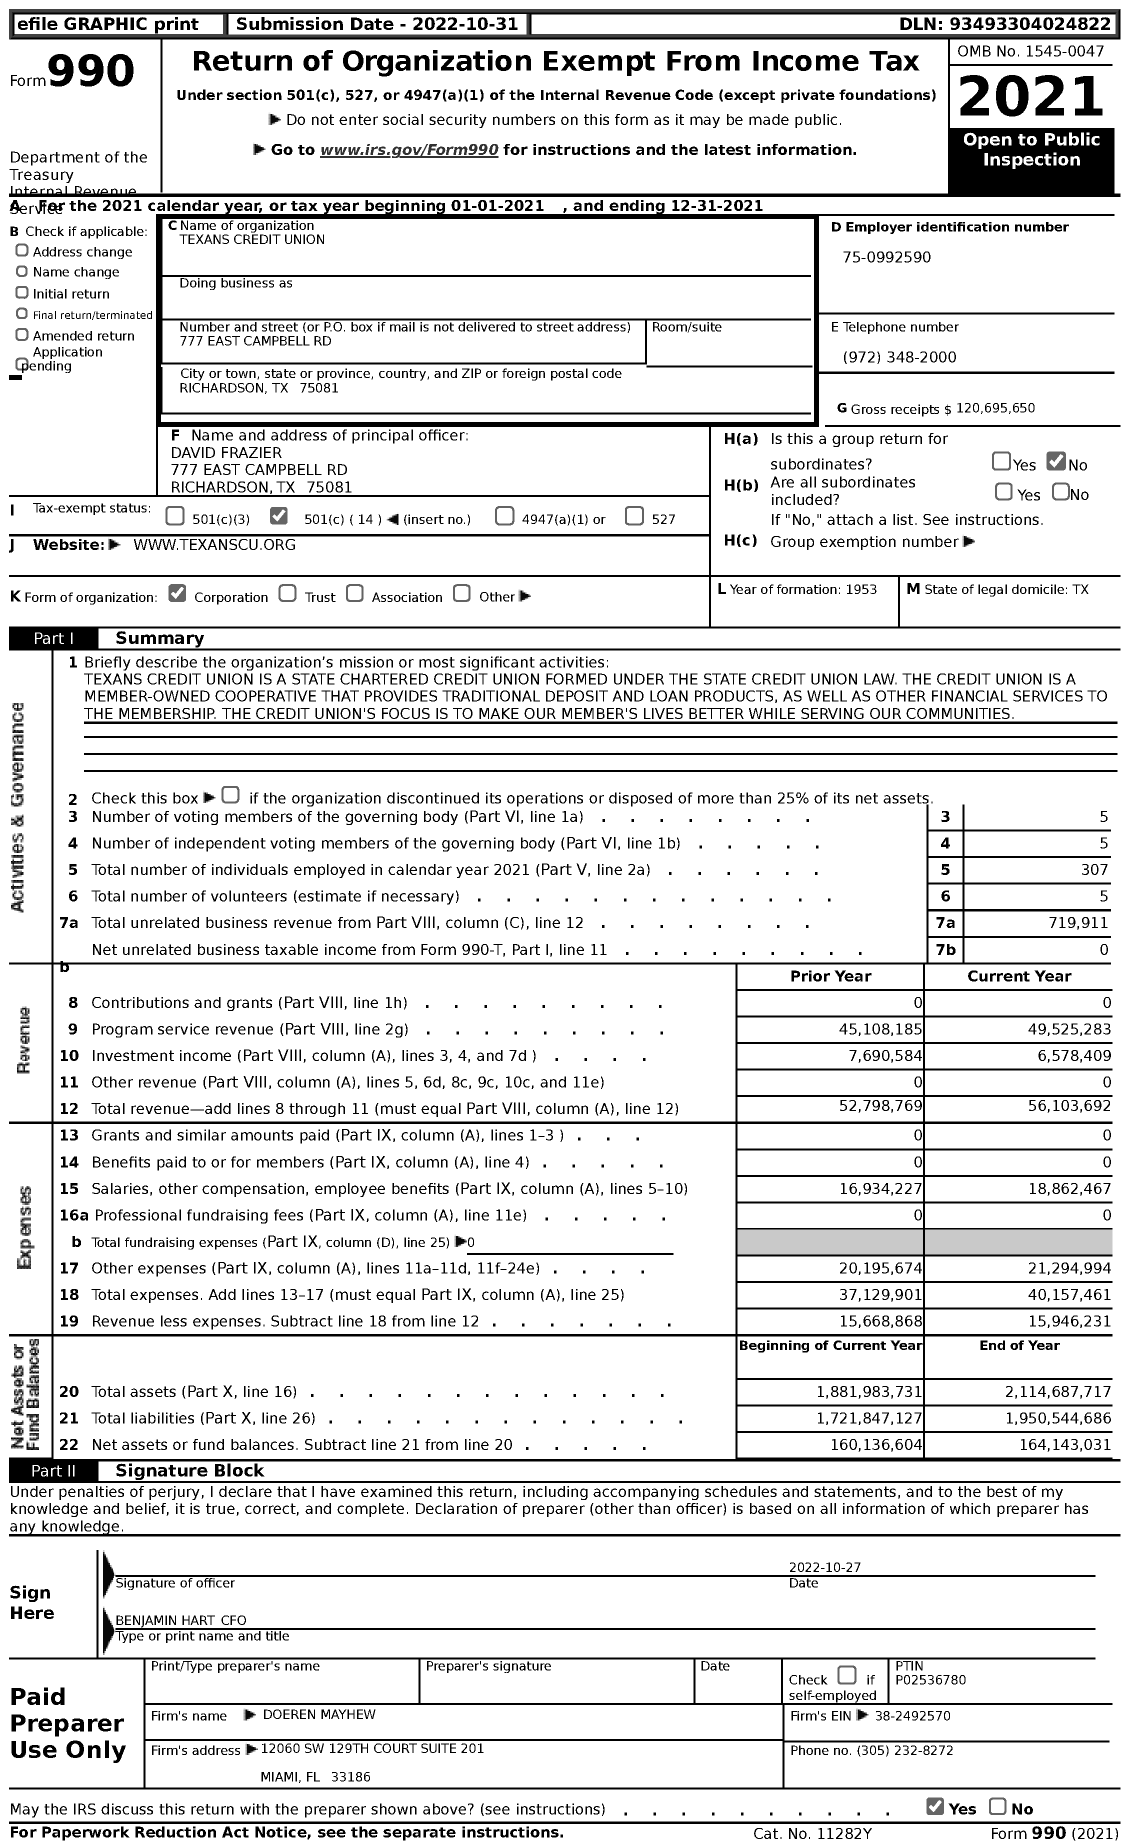 Image of first page of 2021 Form 990 for Texans Credit Union